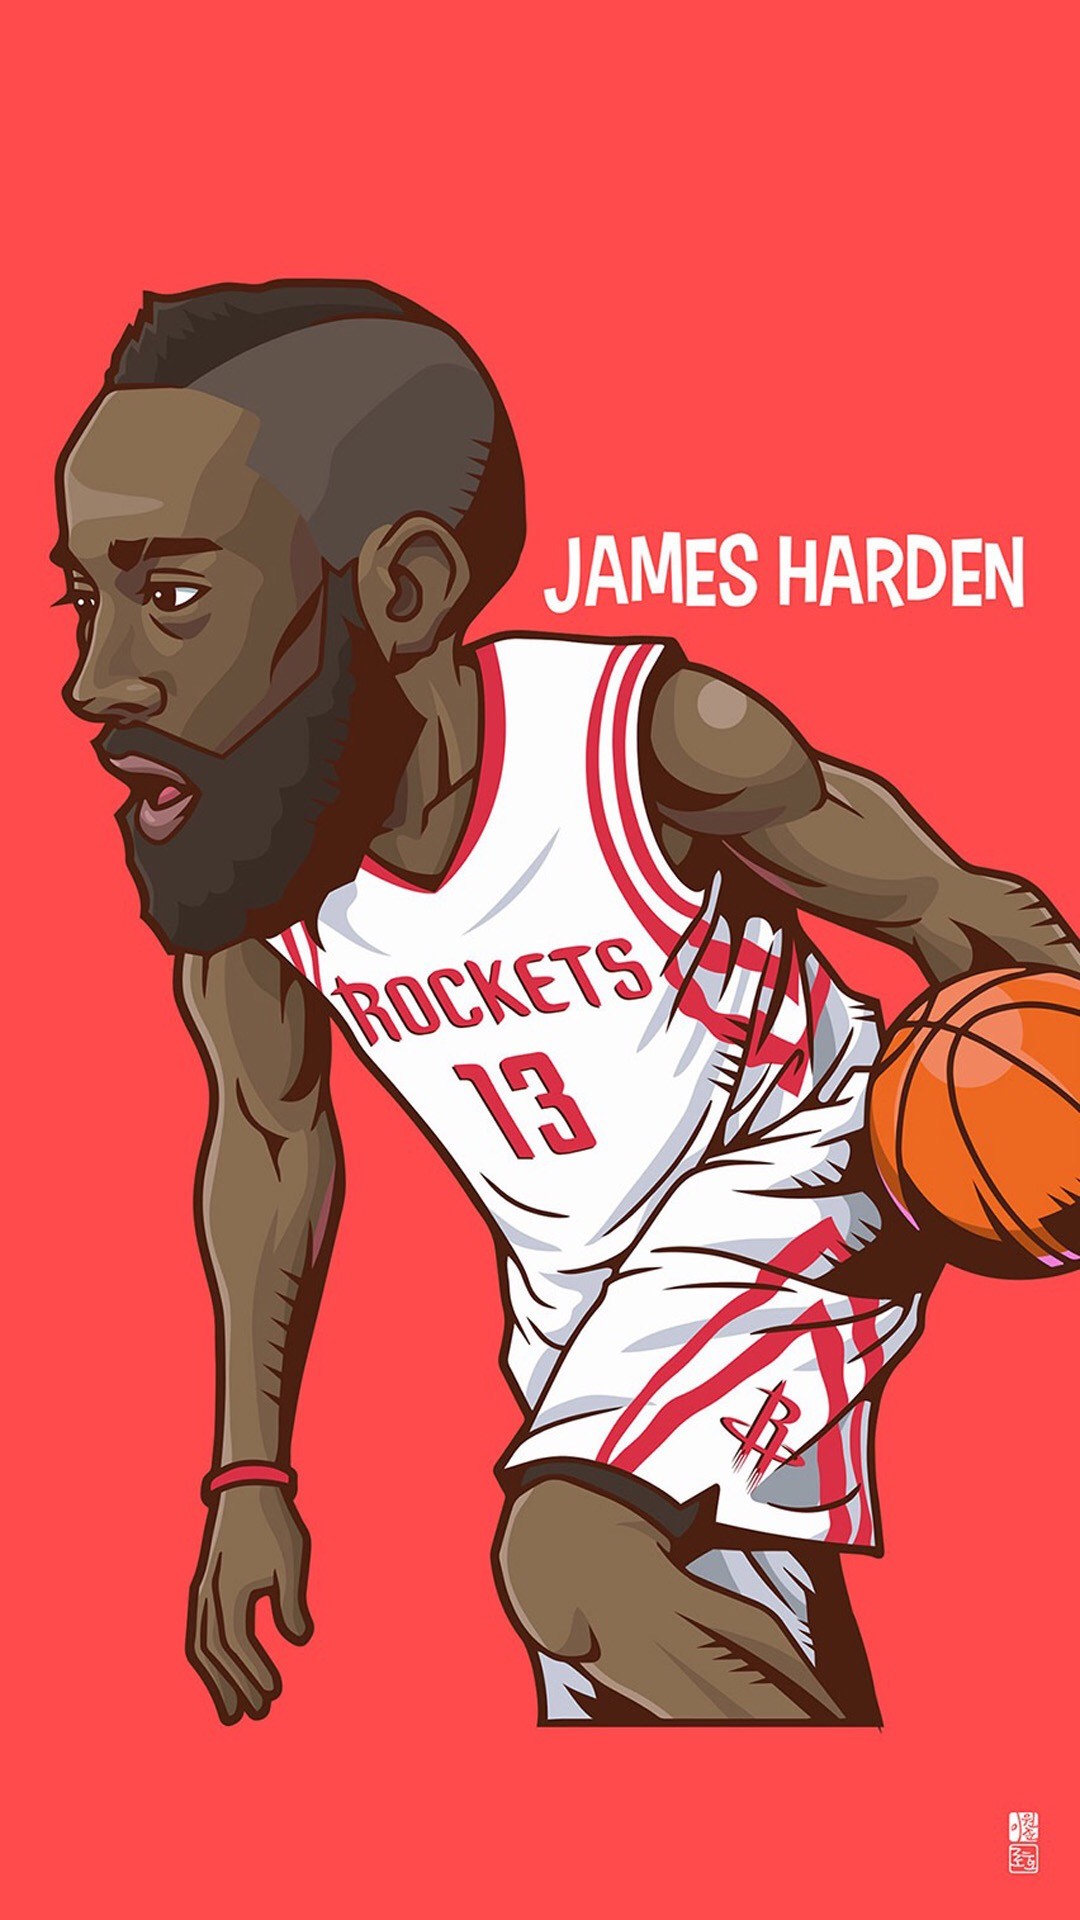 James Harden. Tap to see Collection of Famous NBA Basketball Players Cute Cartoon Wallpapers for